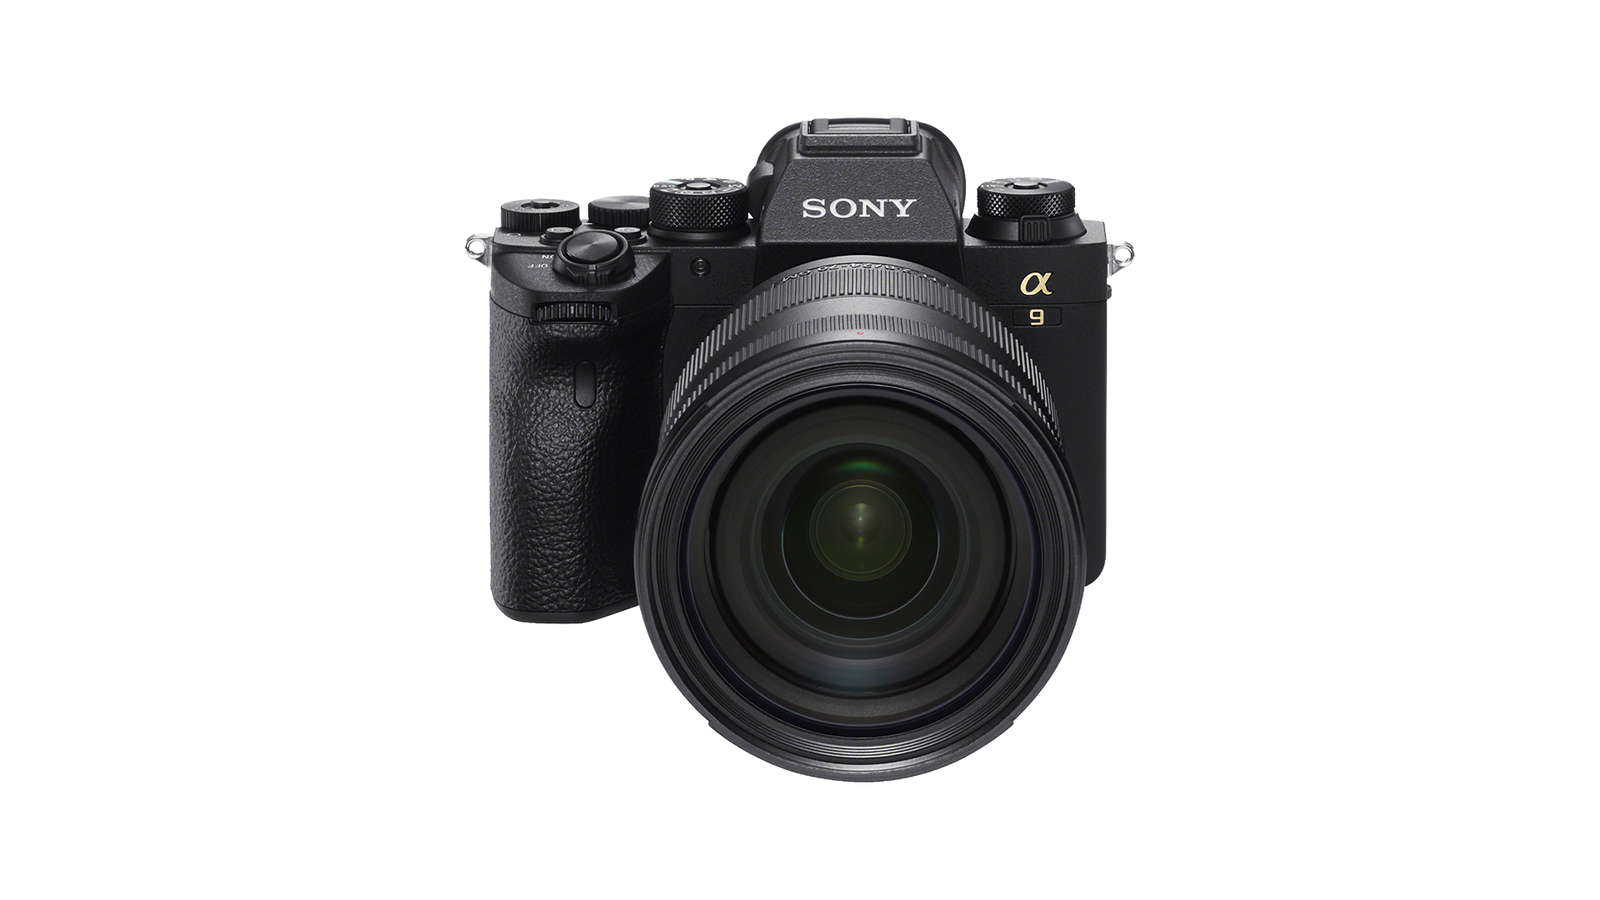 Sony A9 II - The best Mirrorless Sony camera, which appeals to all